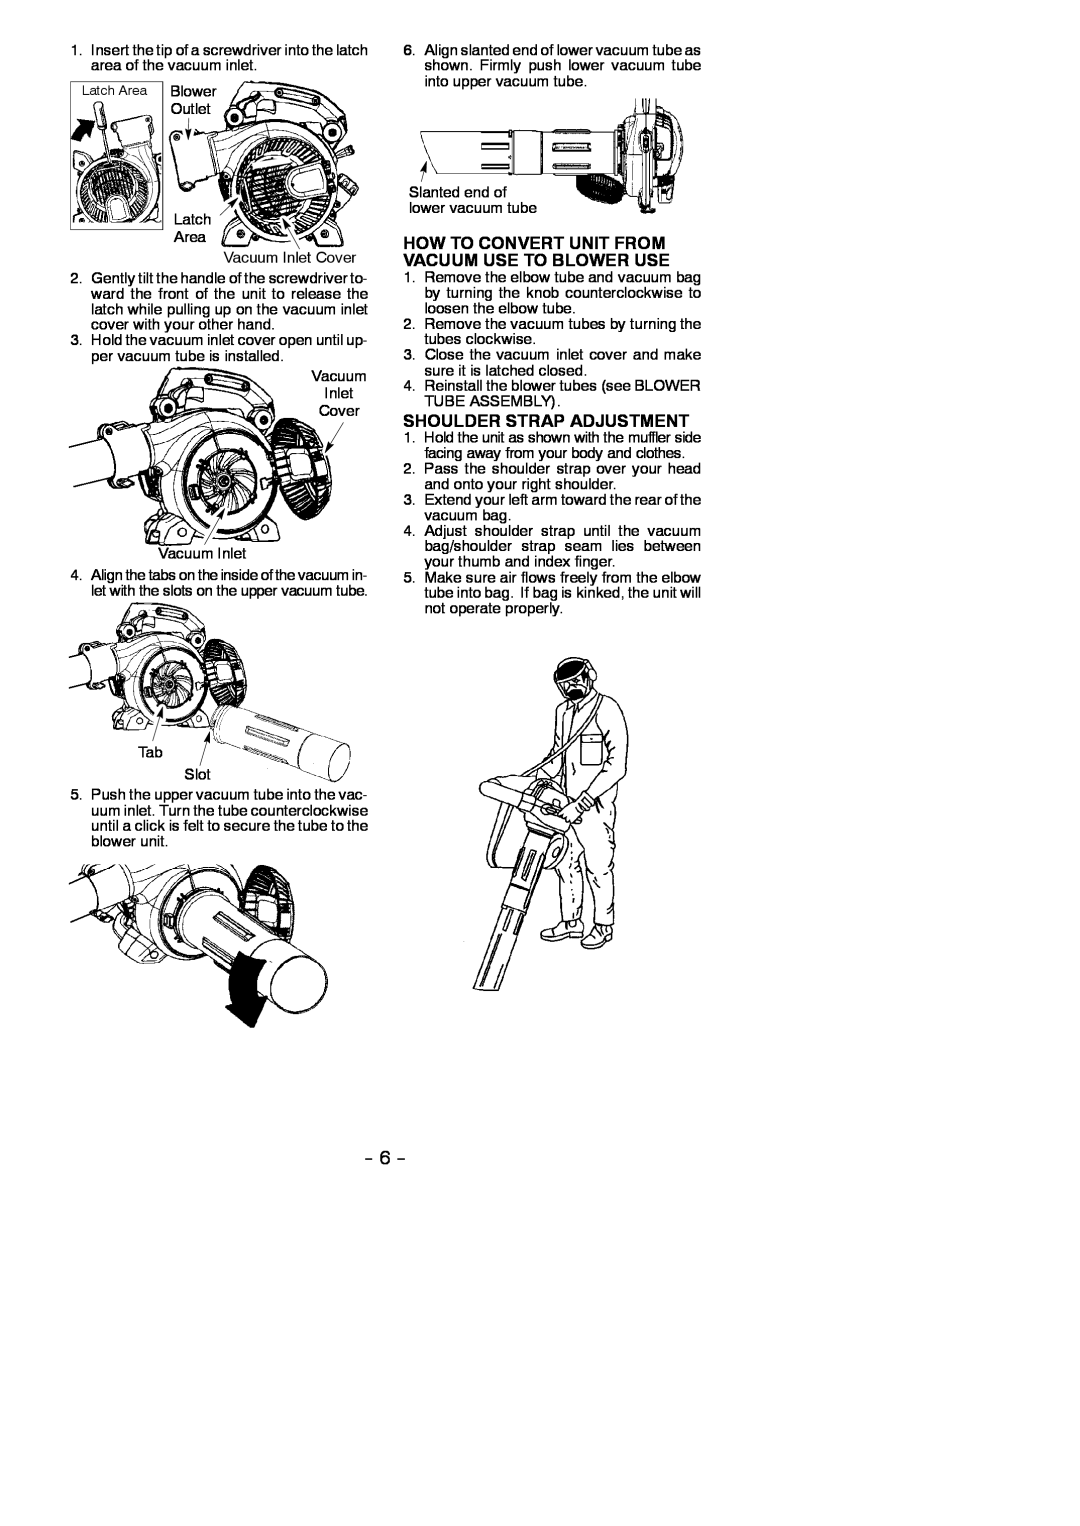 Poulan 952711945, 115351327 instruction manual How To Convert Unit From Vacuum Use To Blower Use, Shoulder Strap Adjustment 